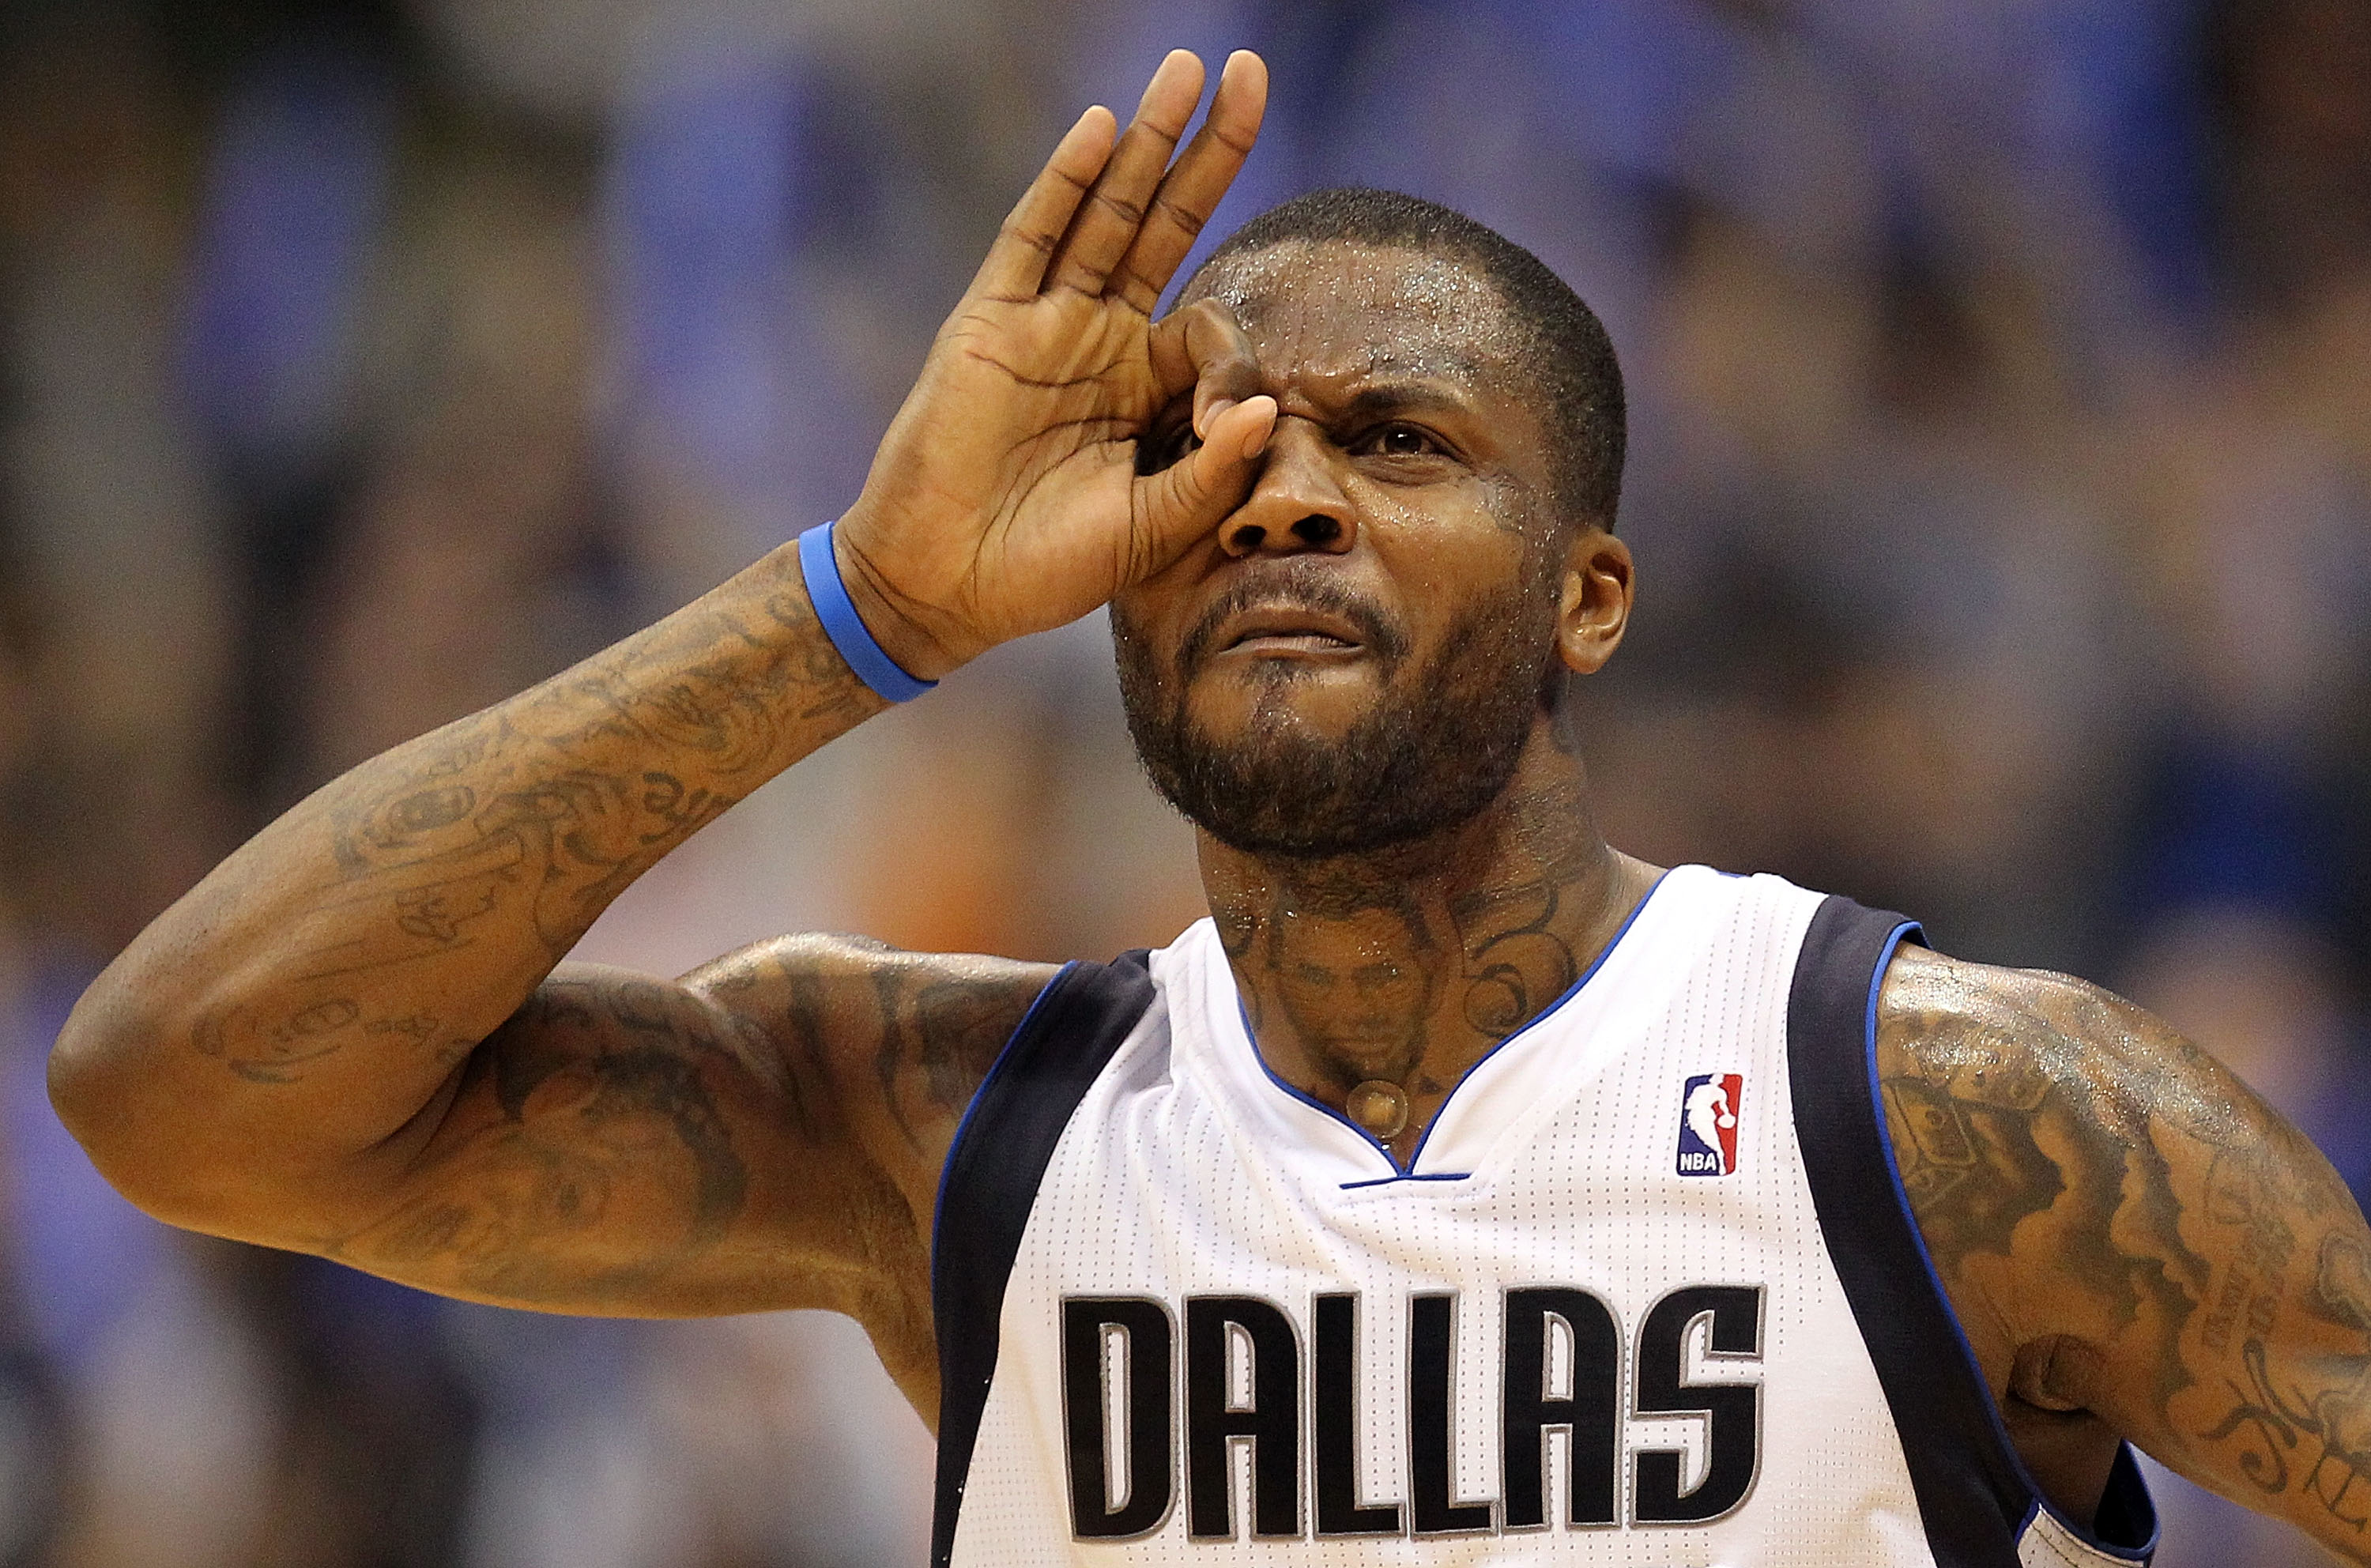 DALLAS, TX - JANUARY 04:  Guard DeShawn Stevenson #92 of the Dallas Mavericks reacts  after making a three point shot against the Portland Trail Blazers at American Airlines Center on January 4, 2011 in Dallas, Texas.  NOTE TO USER: User expressly acknowl